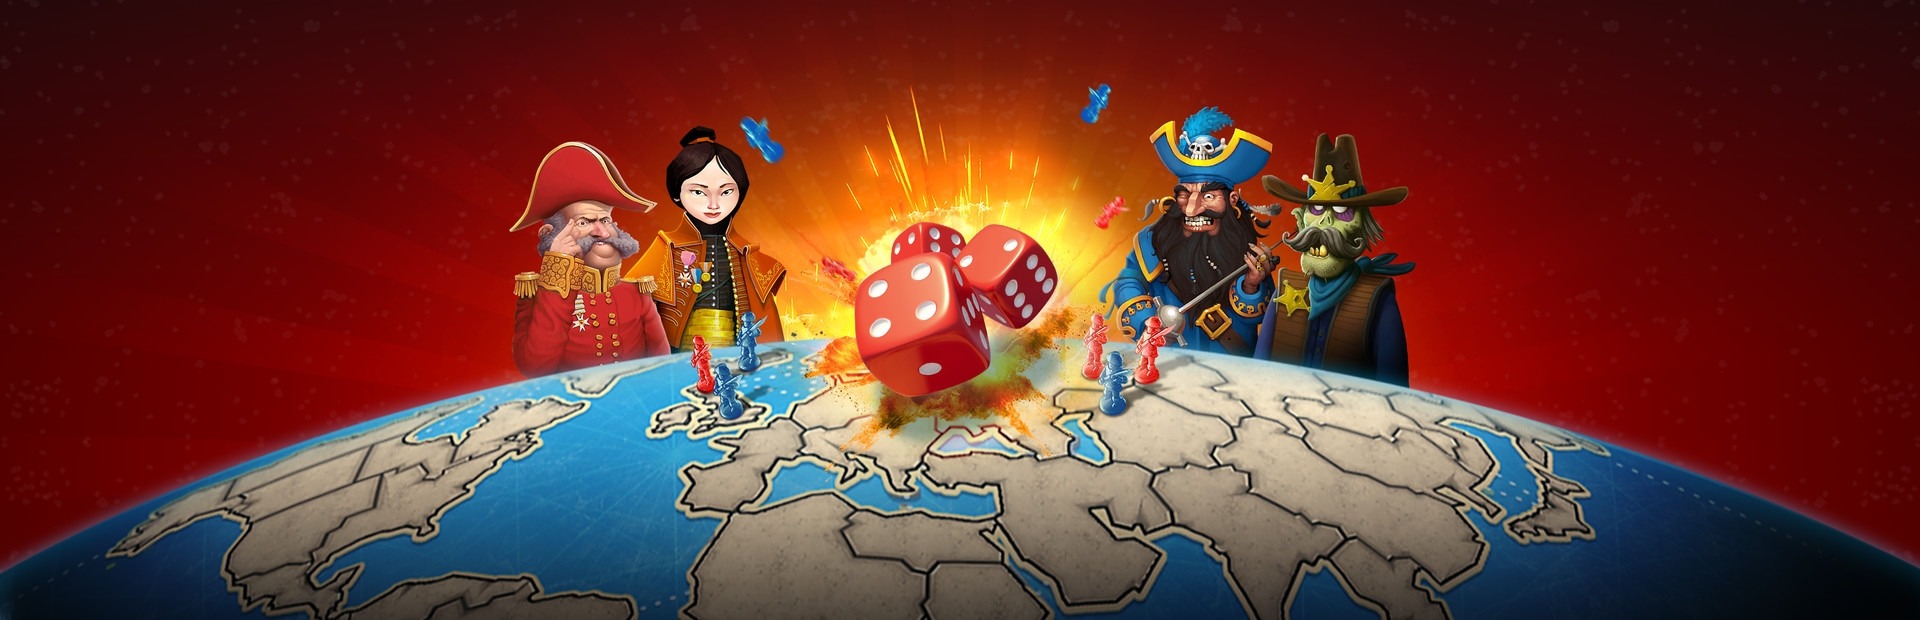 RISK: The Game of Global Domination Switch